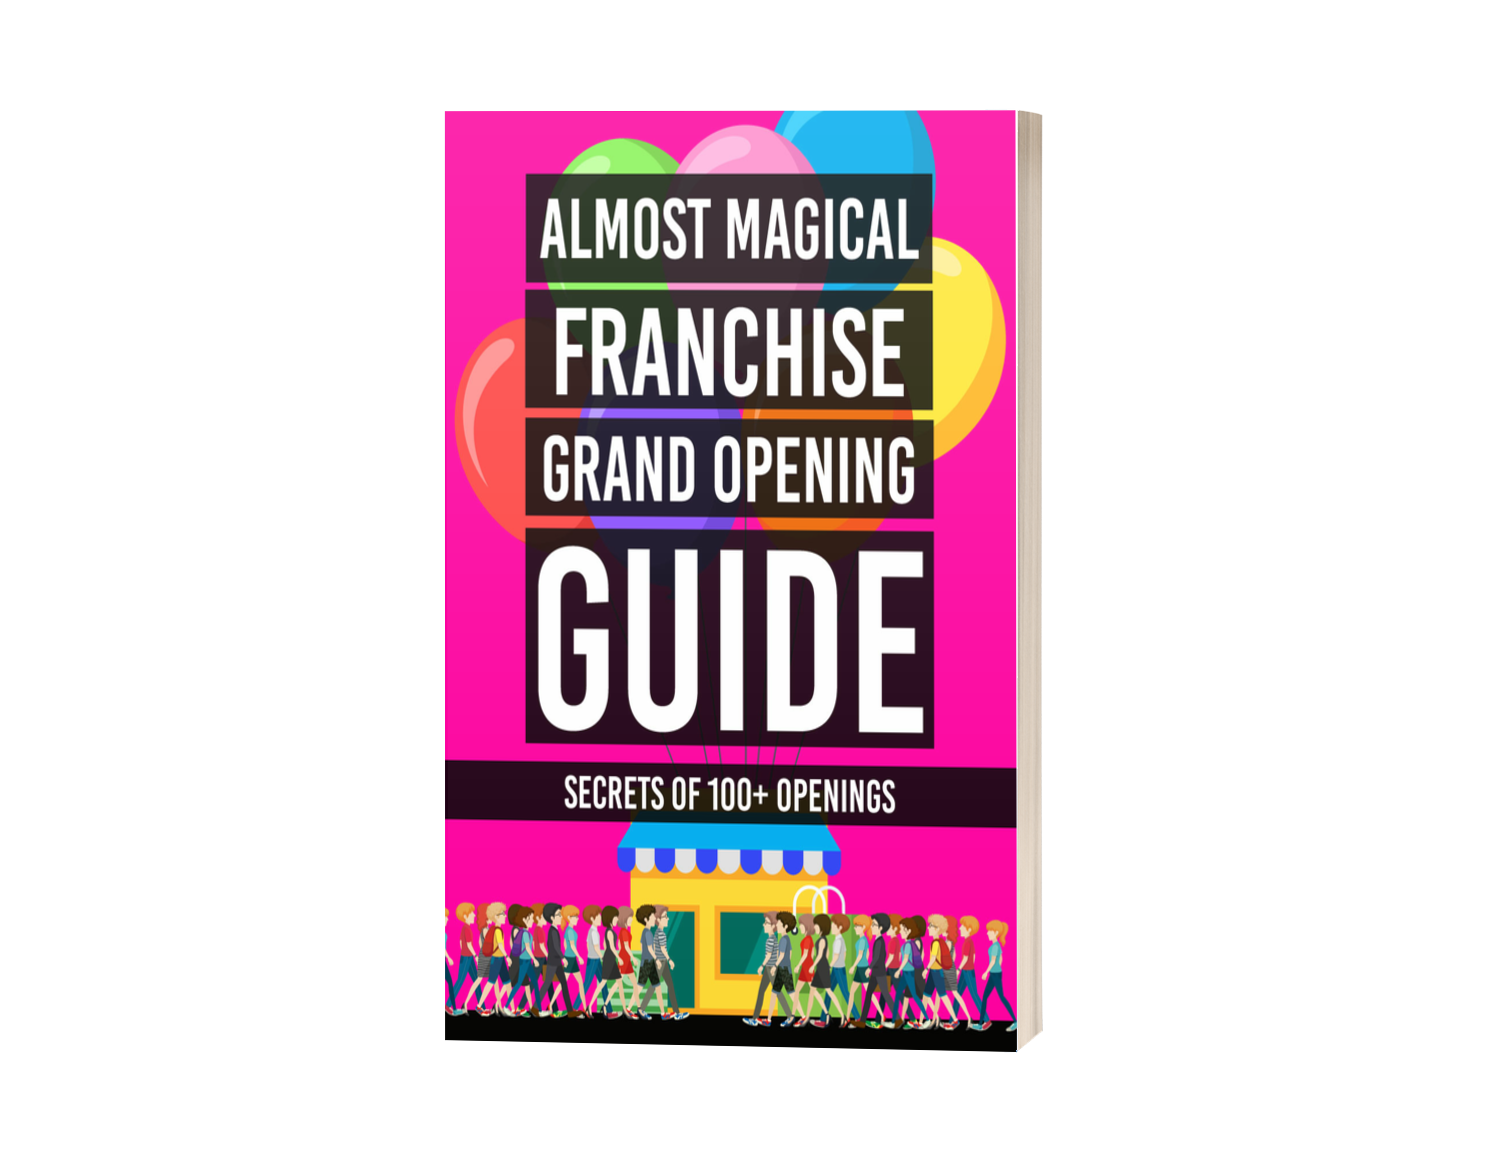 Franchise Grand Opening Guide